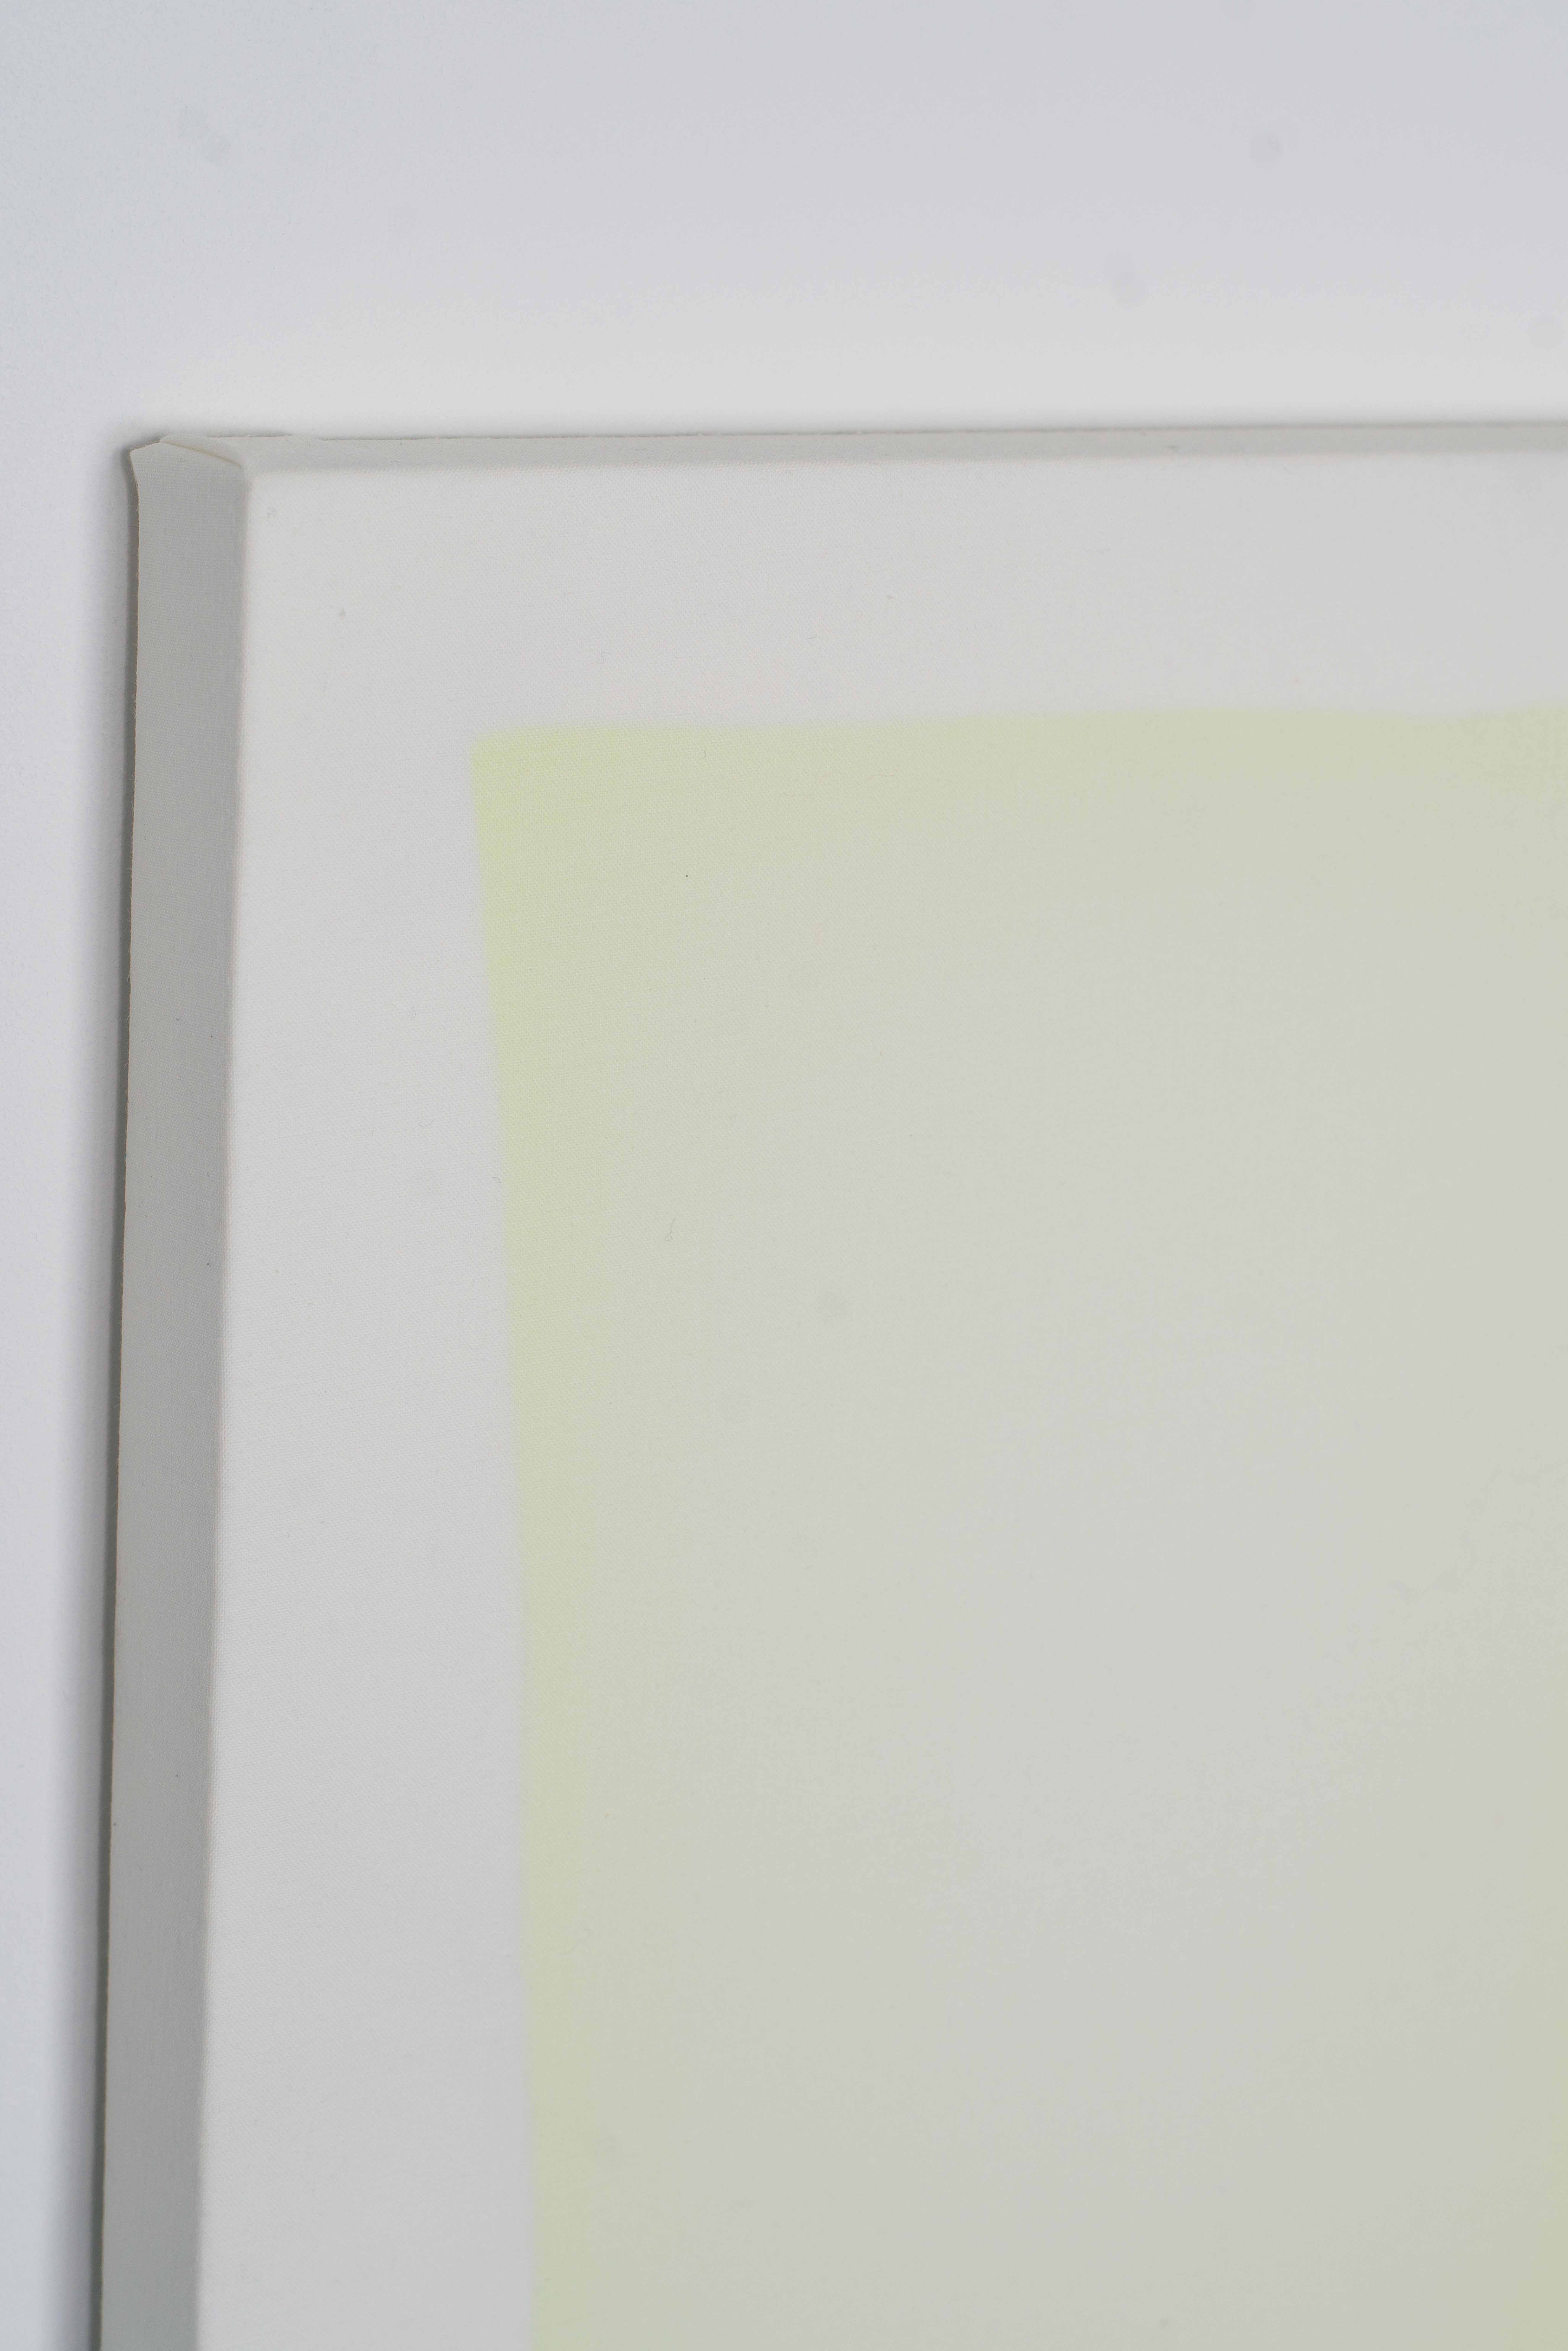 Pale yellow rectangle against a white background